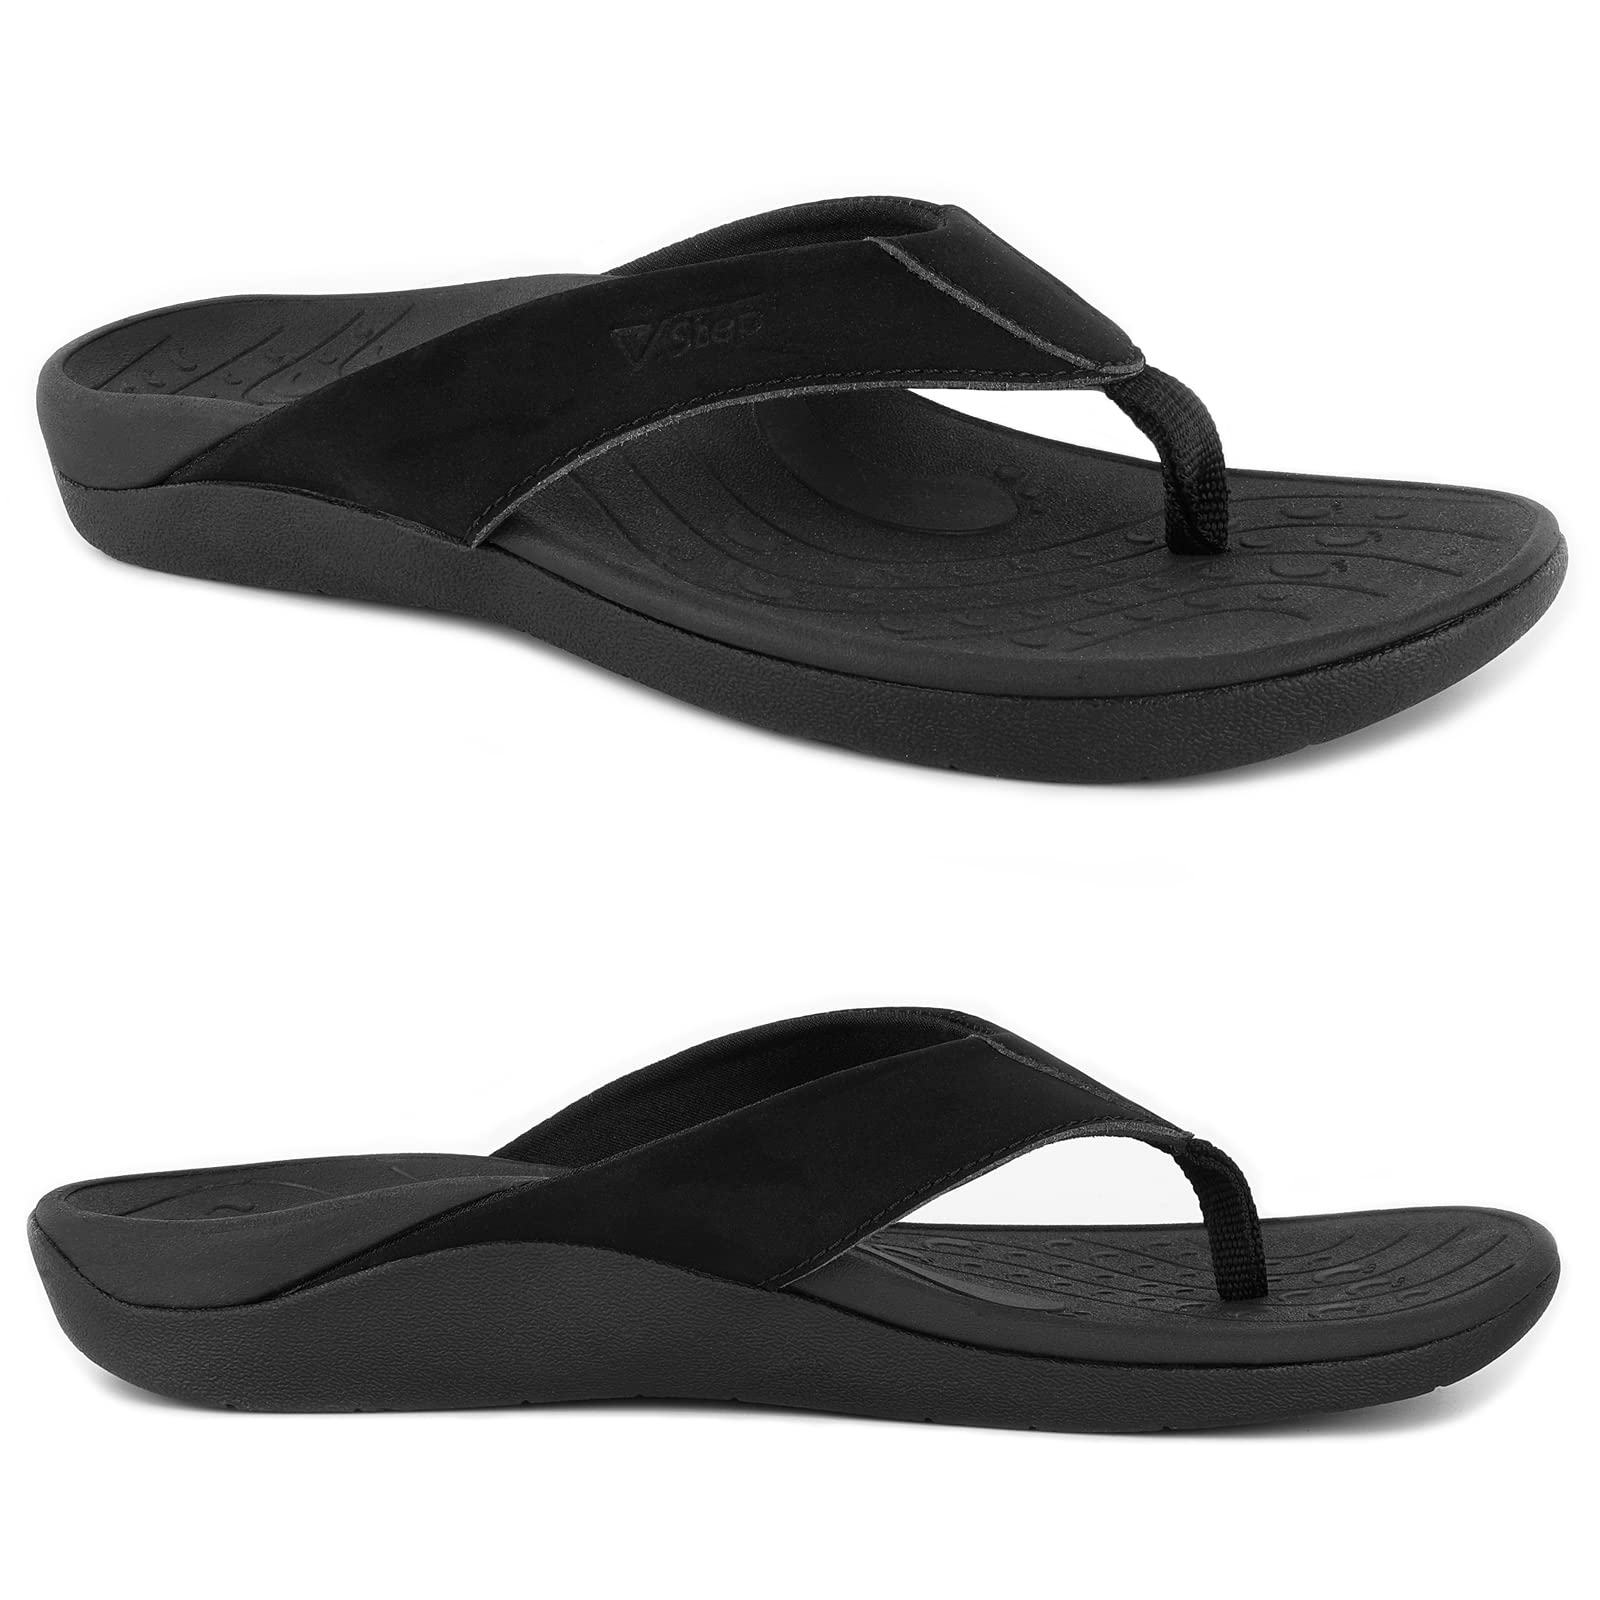 Archies Arch Support Flip Flops - Orthotic Sandals  Comfortable flip  flops, Orthotic flip flops, Most comfortable flip flops